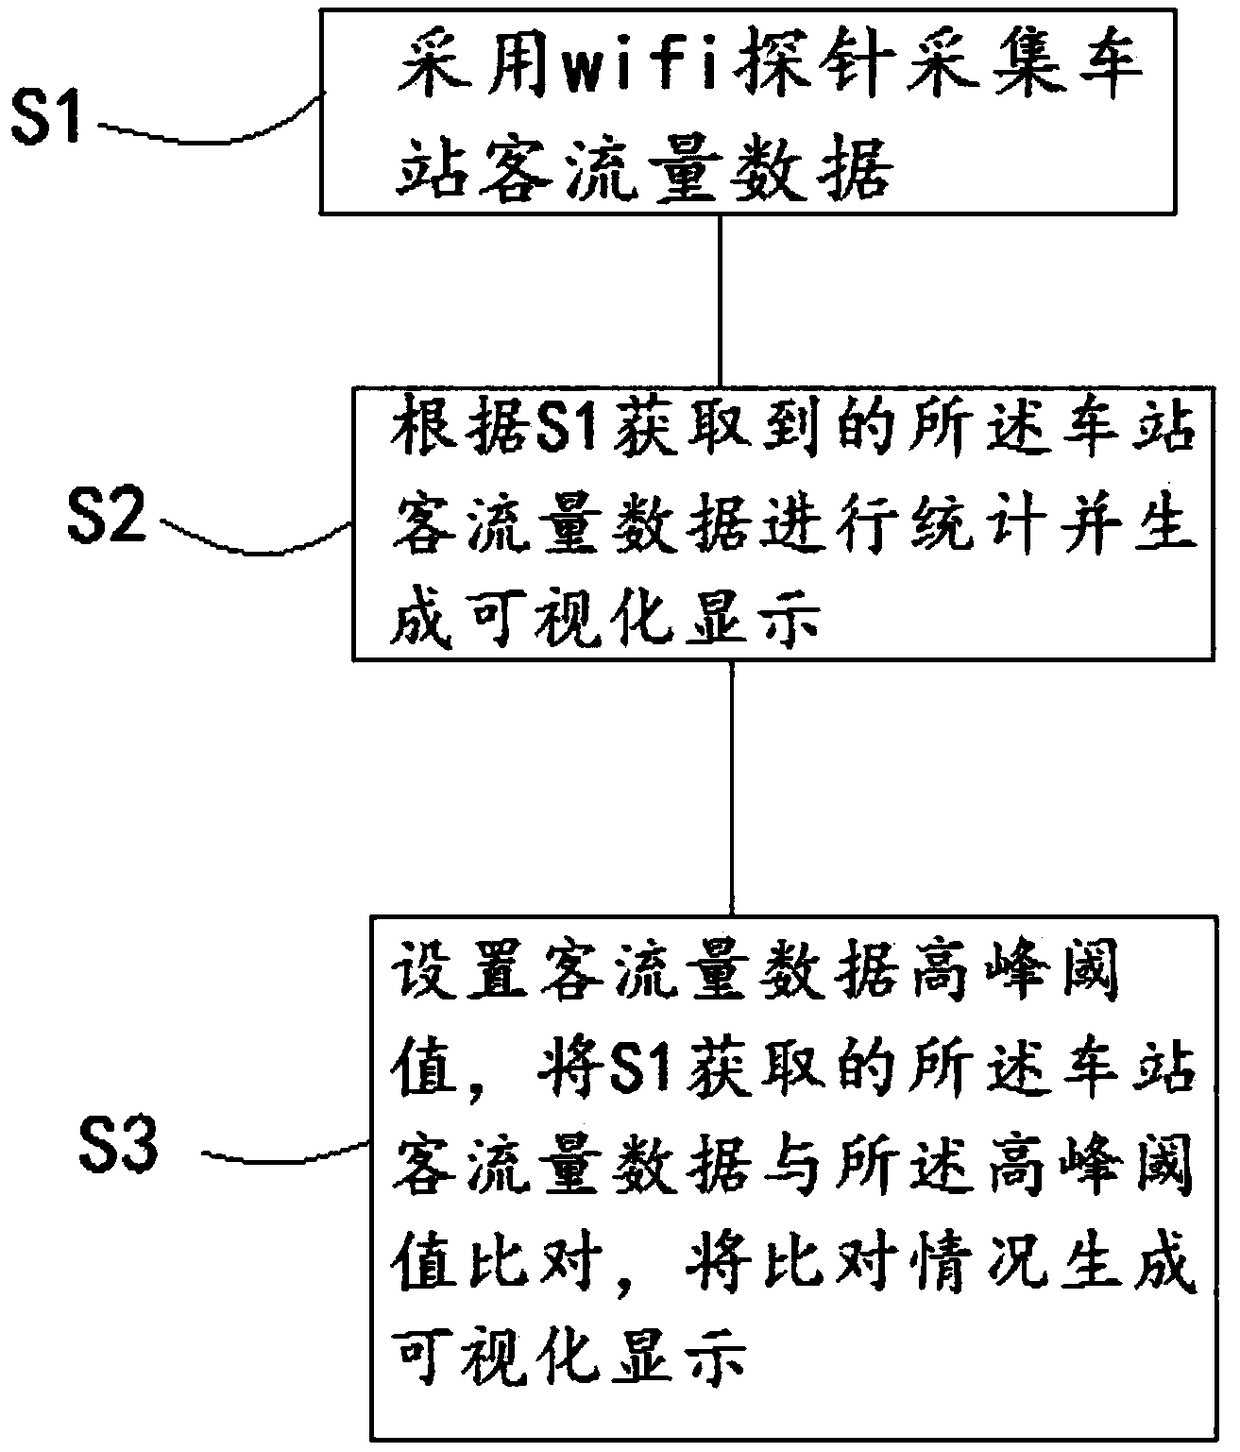 Method and system for predicting and statistically analyzing passenger flow of station